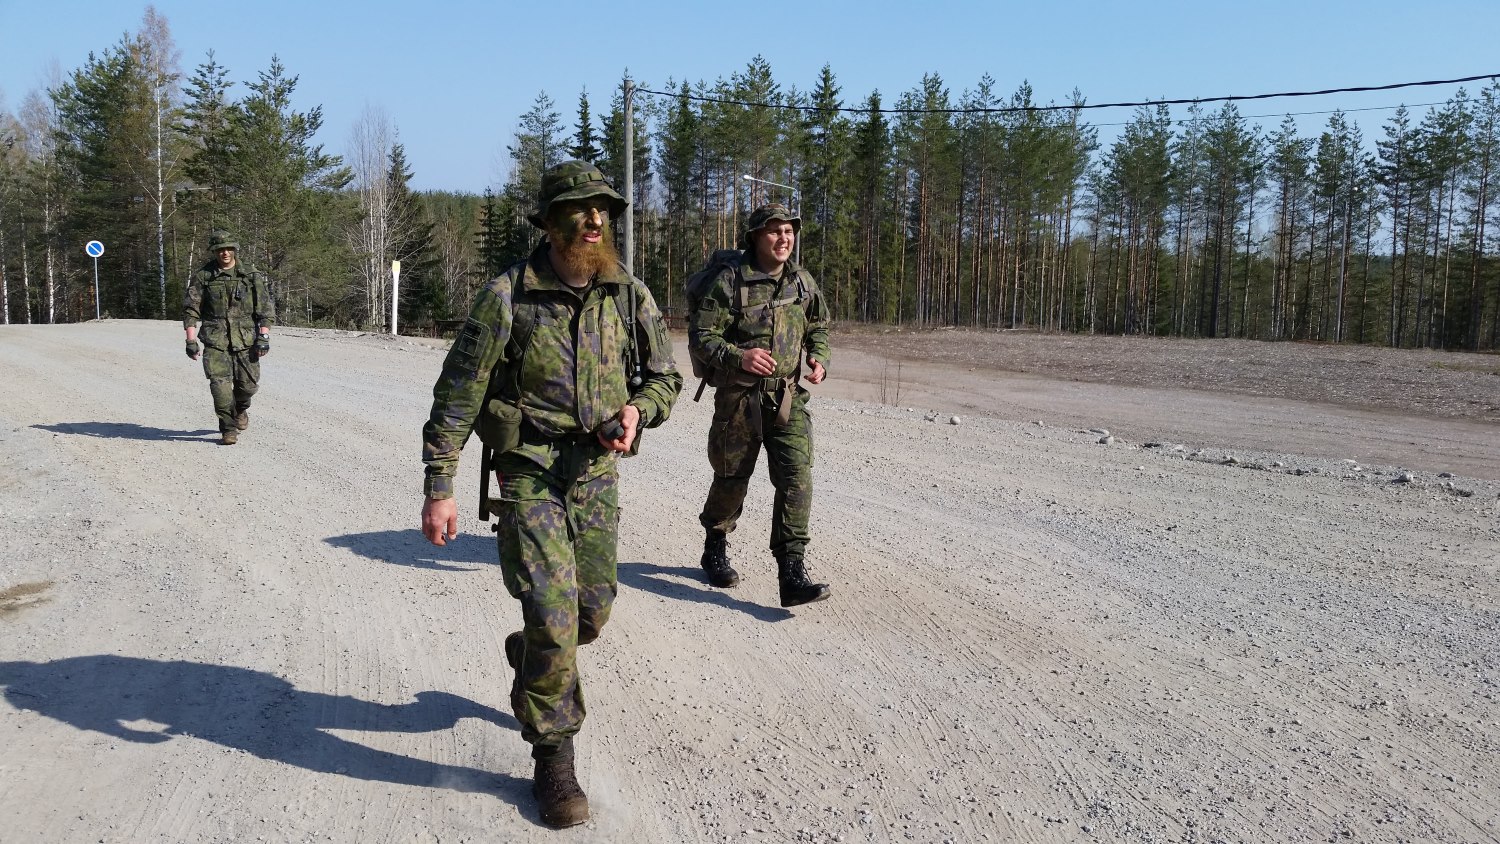 Three people walking on a dirt road in camouflage clothing.